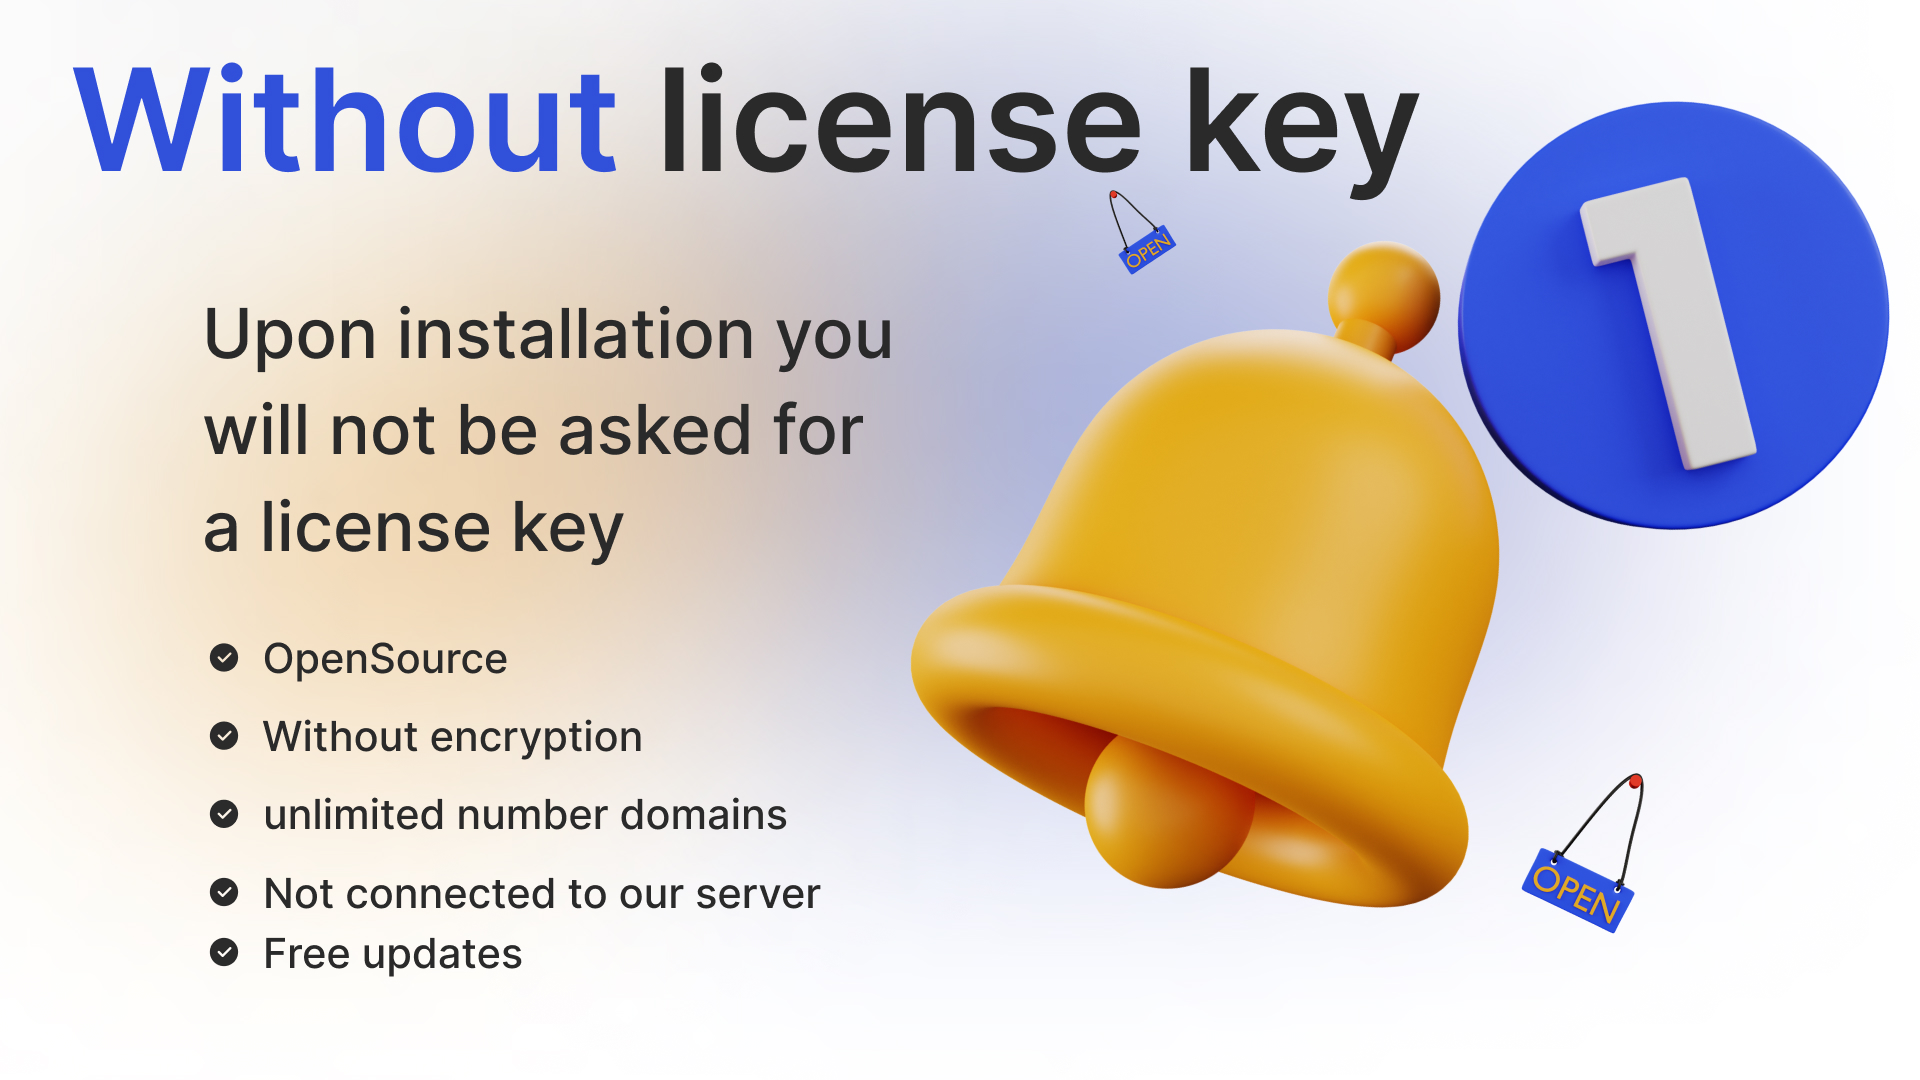 Without license key